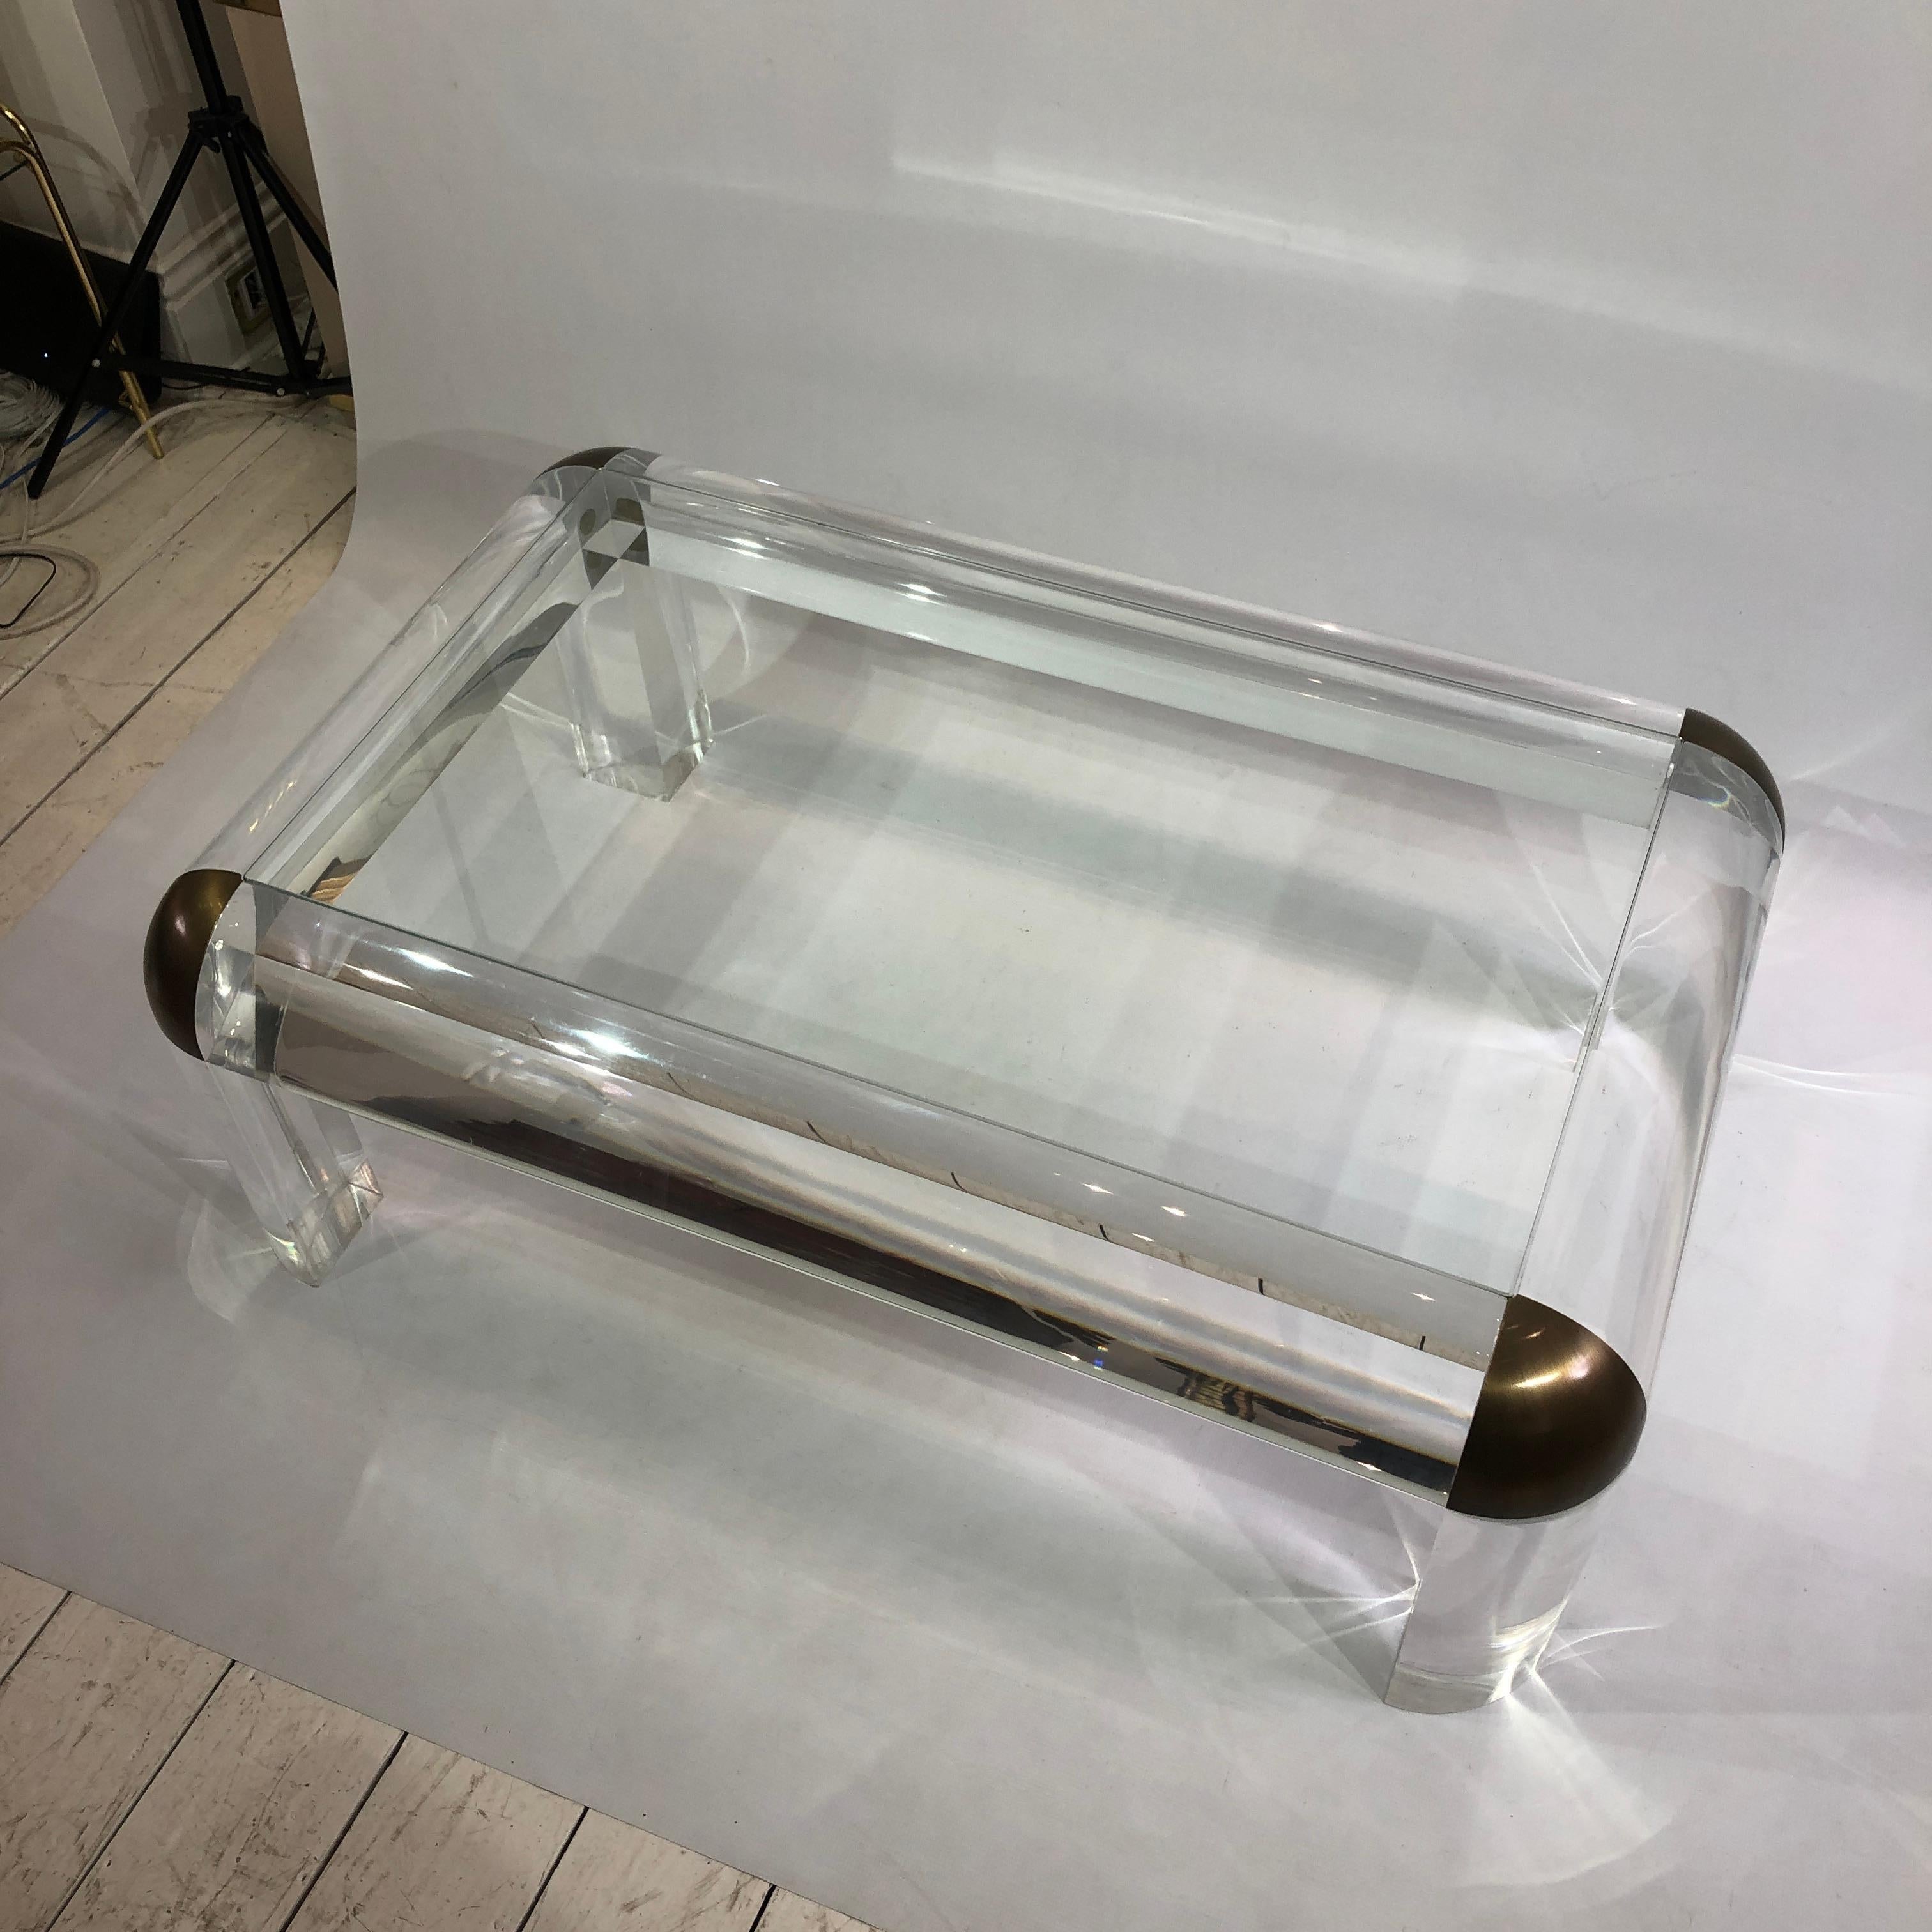 Lucite Brass Glass Karl Springer Style Coffee Table 1970s Modernist Mid-century For Sale 1